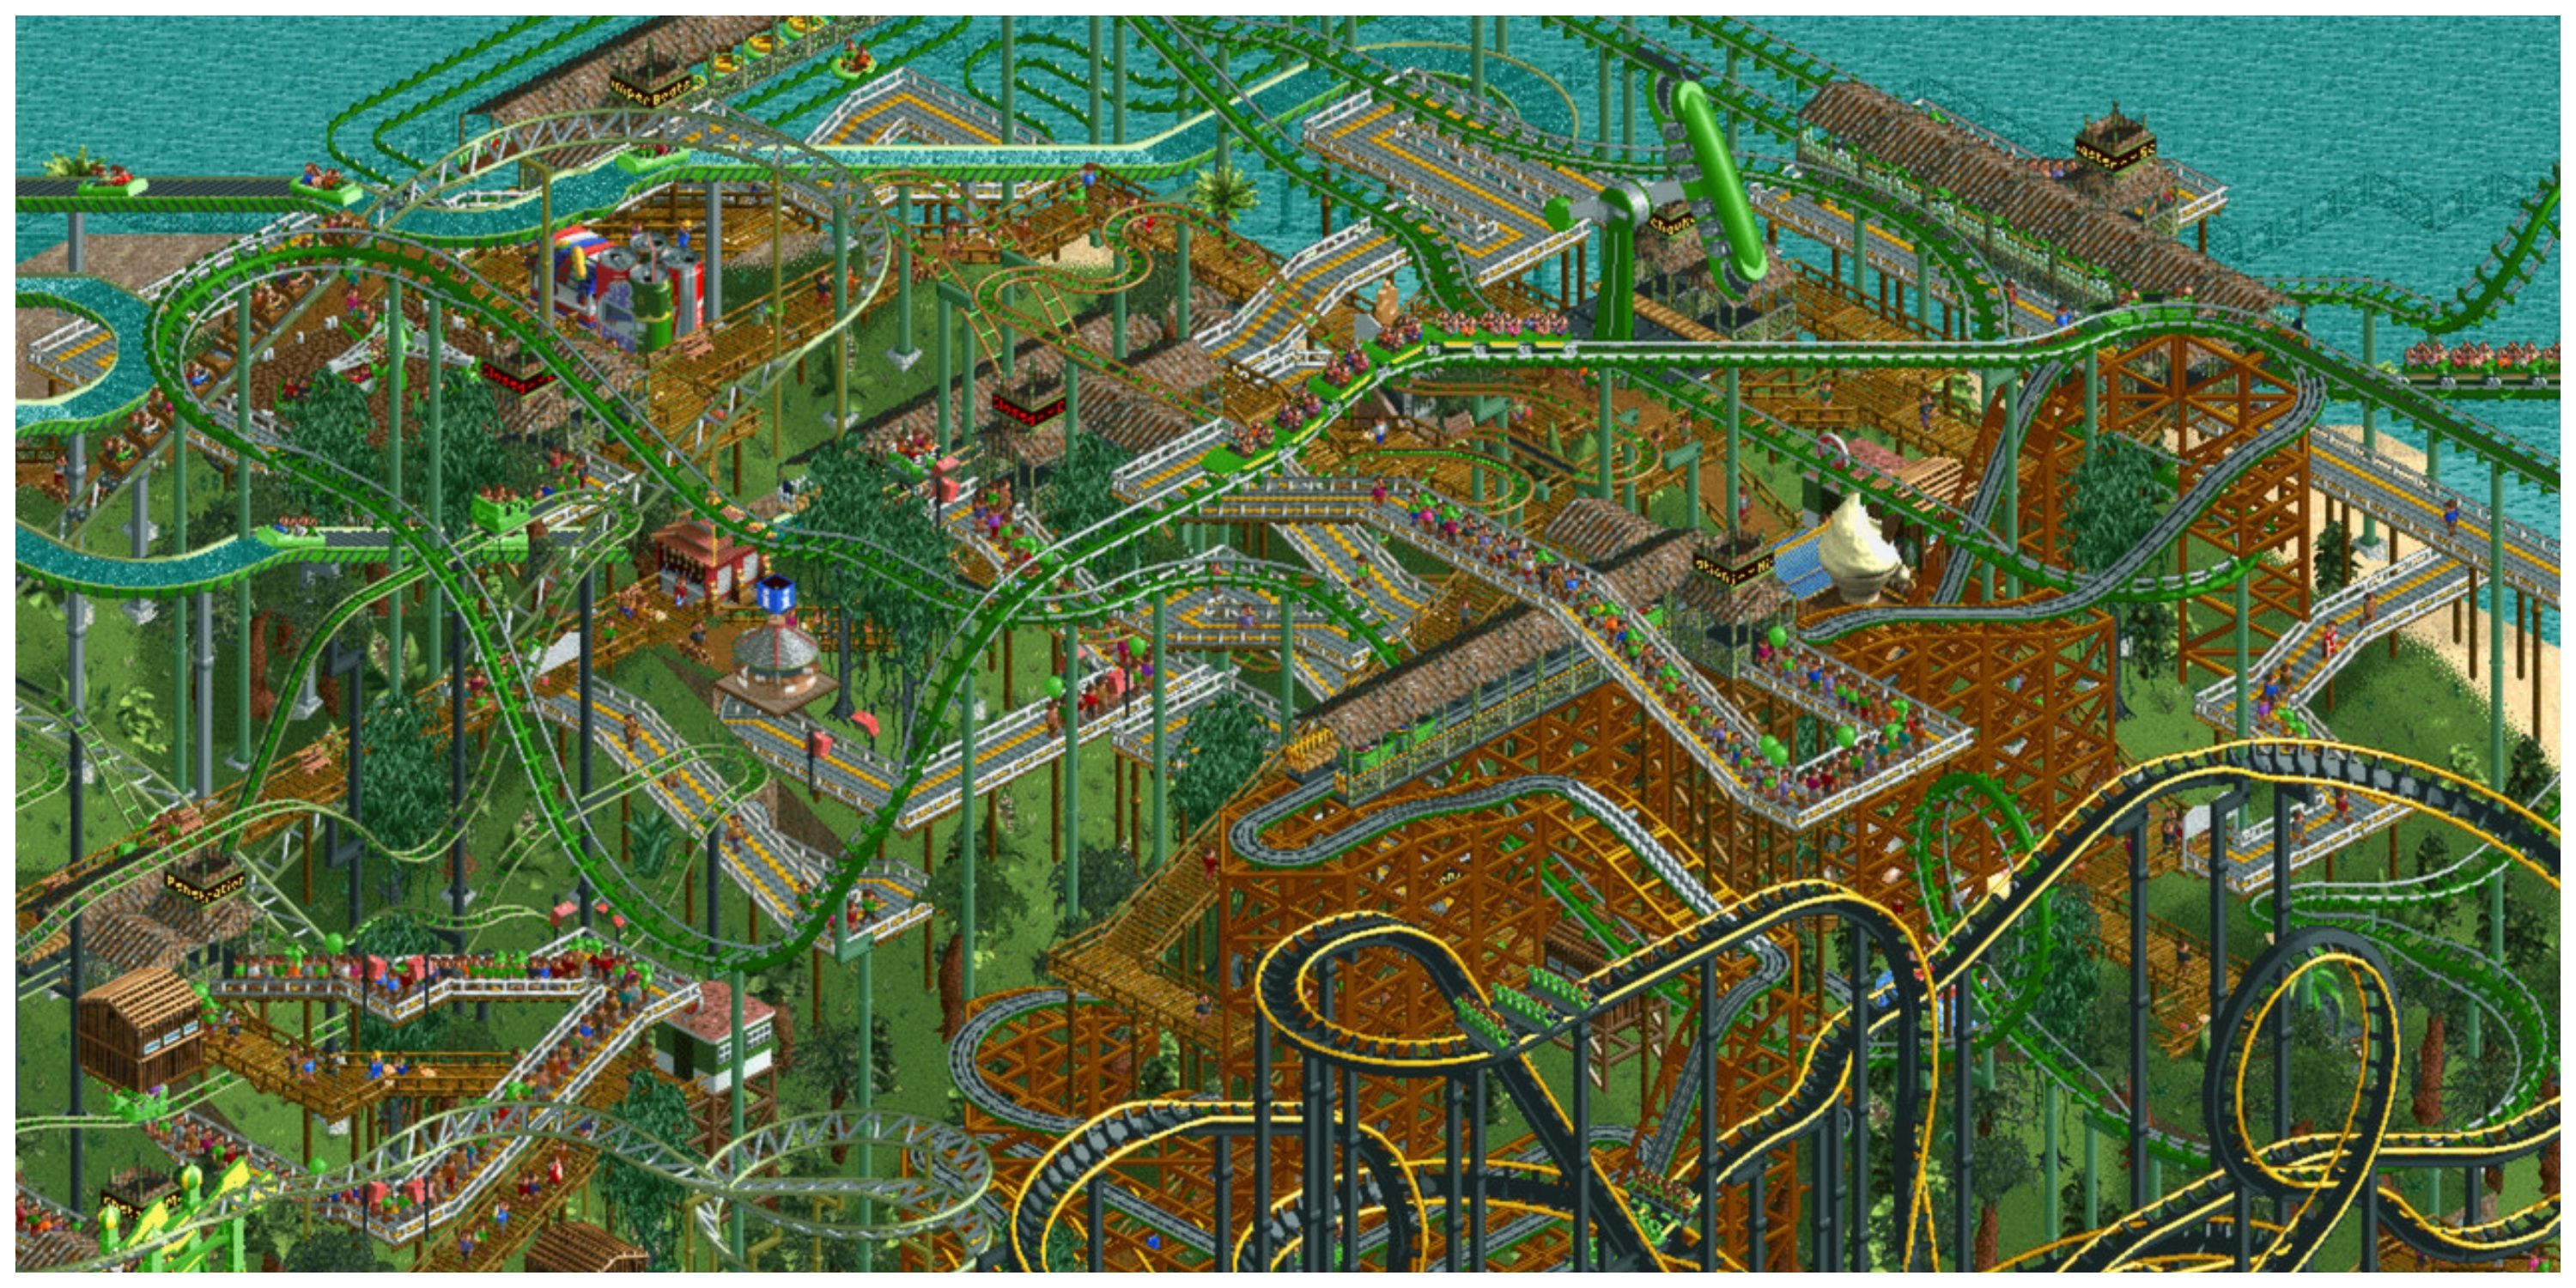 RollerCoaster Tycoon 2 - Steam Store Page Screenshot (Several Roller-Coasters)